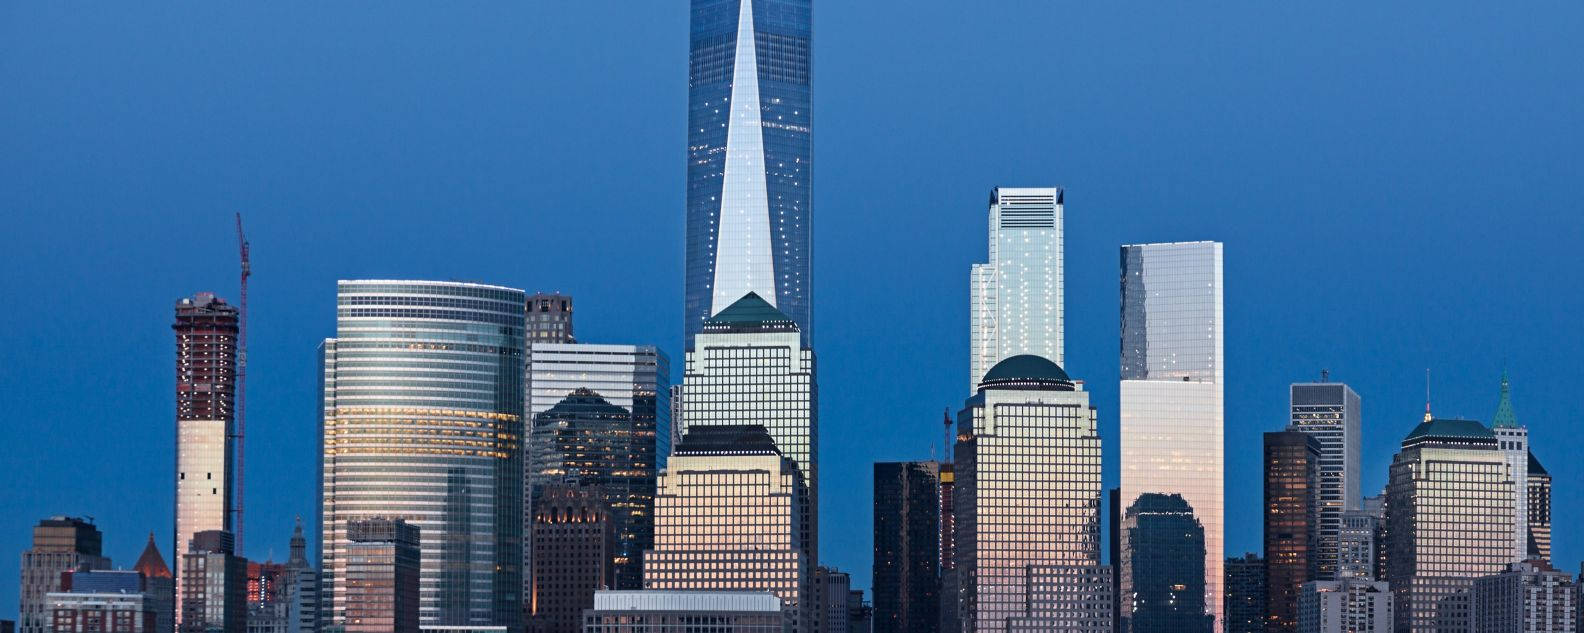 United States One World Trade Center With Buildings Picture